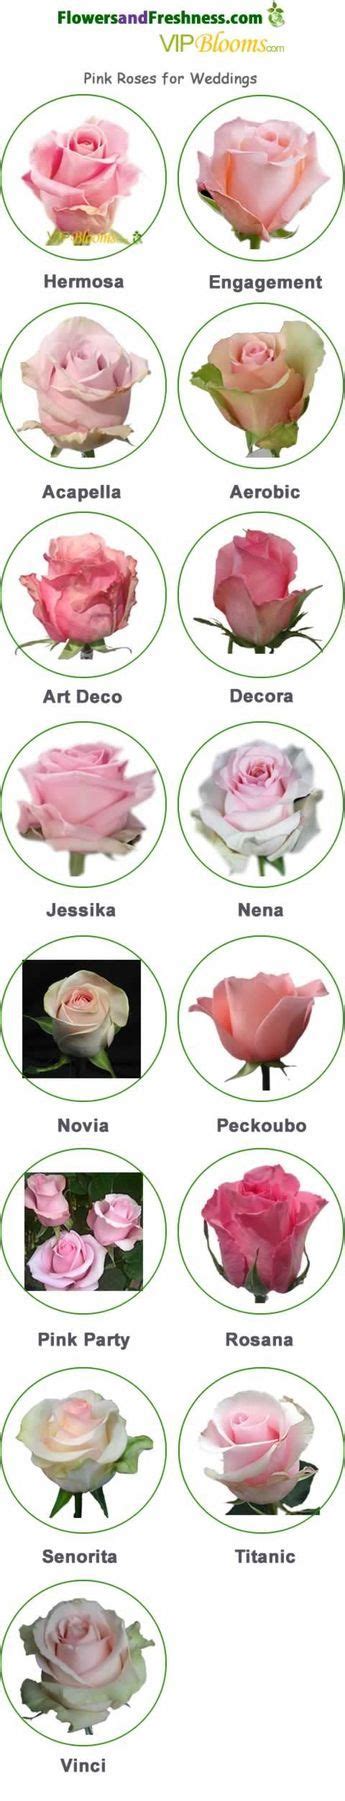 Learn About Types Of Pink Flowers And See Pink Flower Images To Help